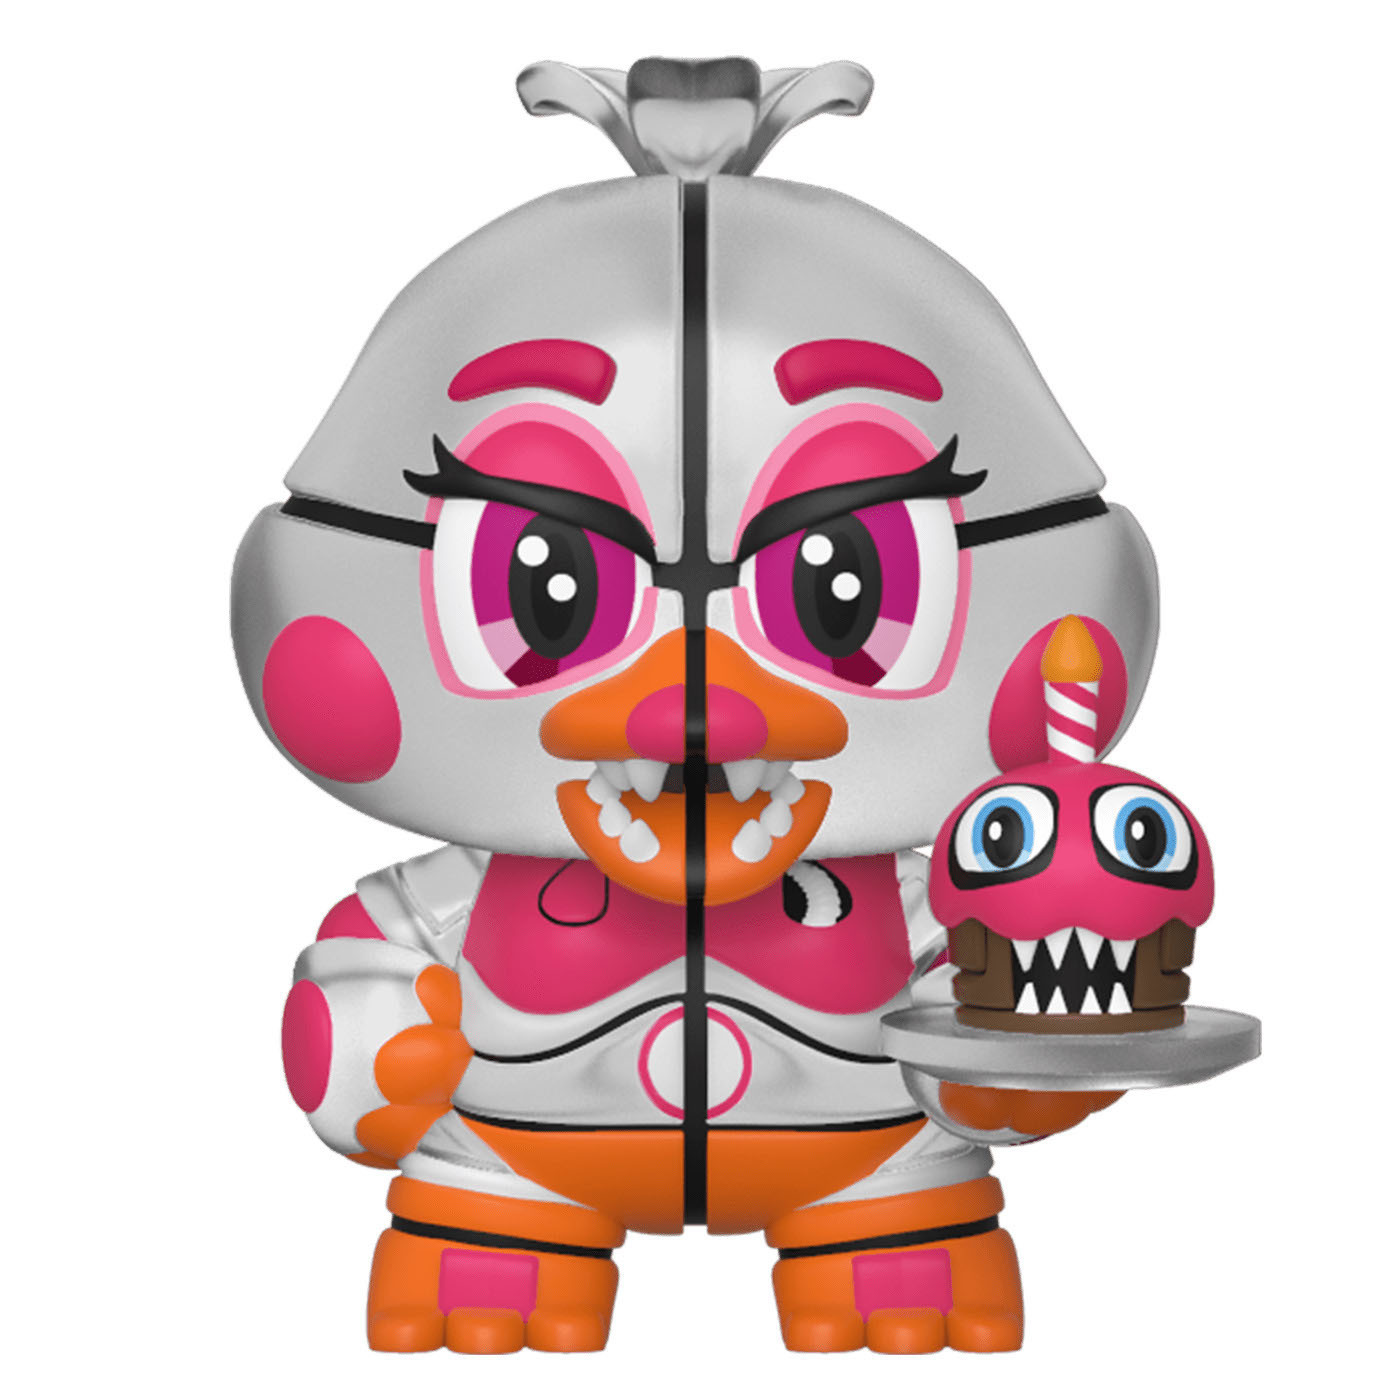 Funko Mystery Minis Vinyl Figure - Five Nights at Freddy's Pizza Sim - FUNTIME  CHICA (2.25 inch) 